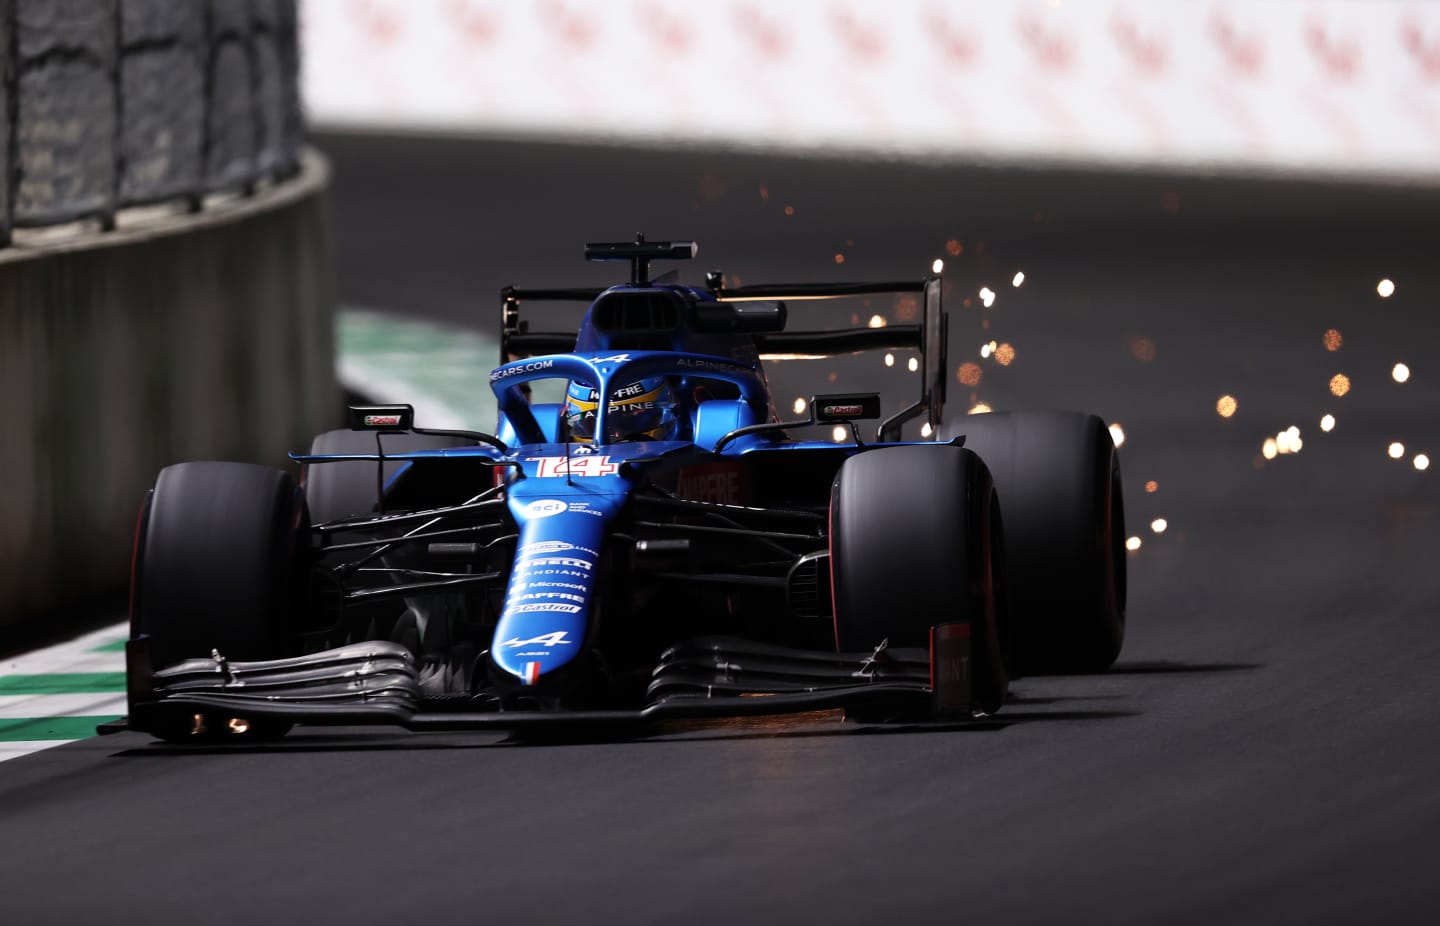 JEDDAH, SAUDI ARABIA - DECEMBER 03: Sparks fly behind Fernando Alonso of Spain driving the (14) Alpine A521 Renault during practice ahead of the F1 Grand Prix of Saudi Arabia at Jeddah Corniche Circuit on December 03, 2021 in Jeddah, Saudi Arabia. (Photo by Lars Baron/Getty Images)